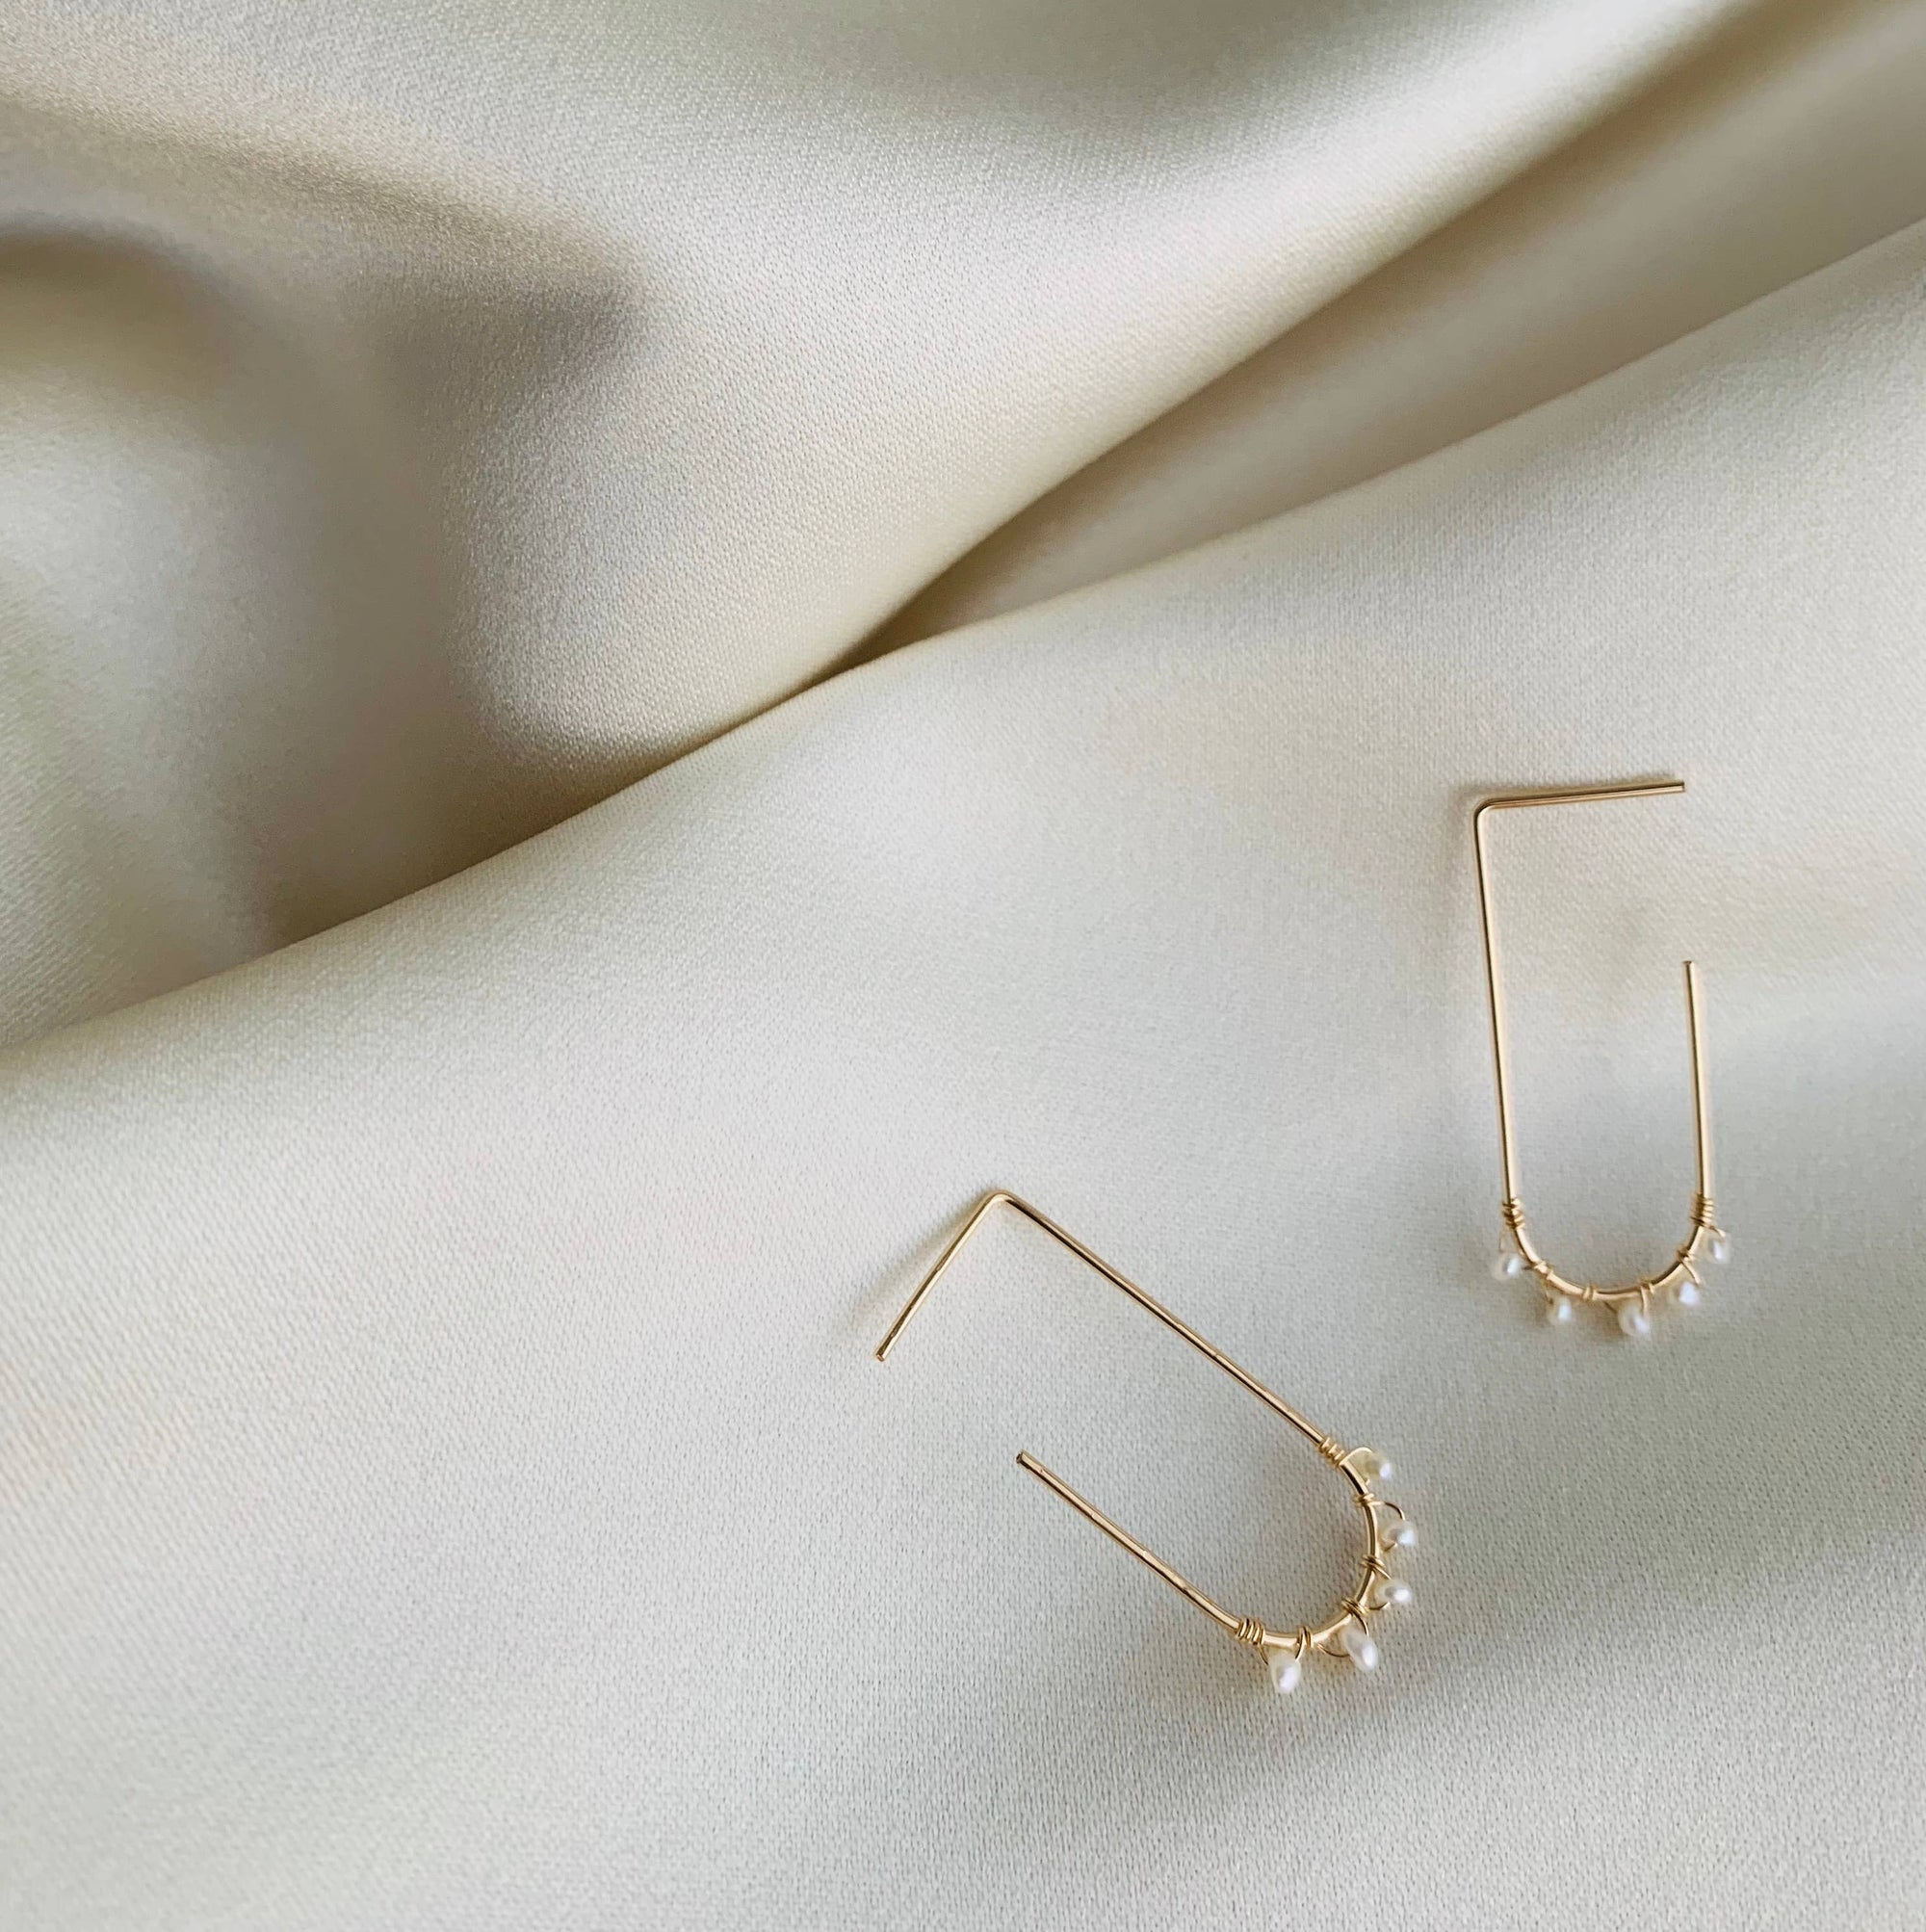 The Cecilia With Pearls Earrings by Points Jewelry